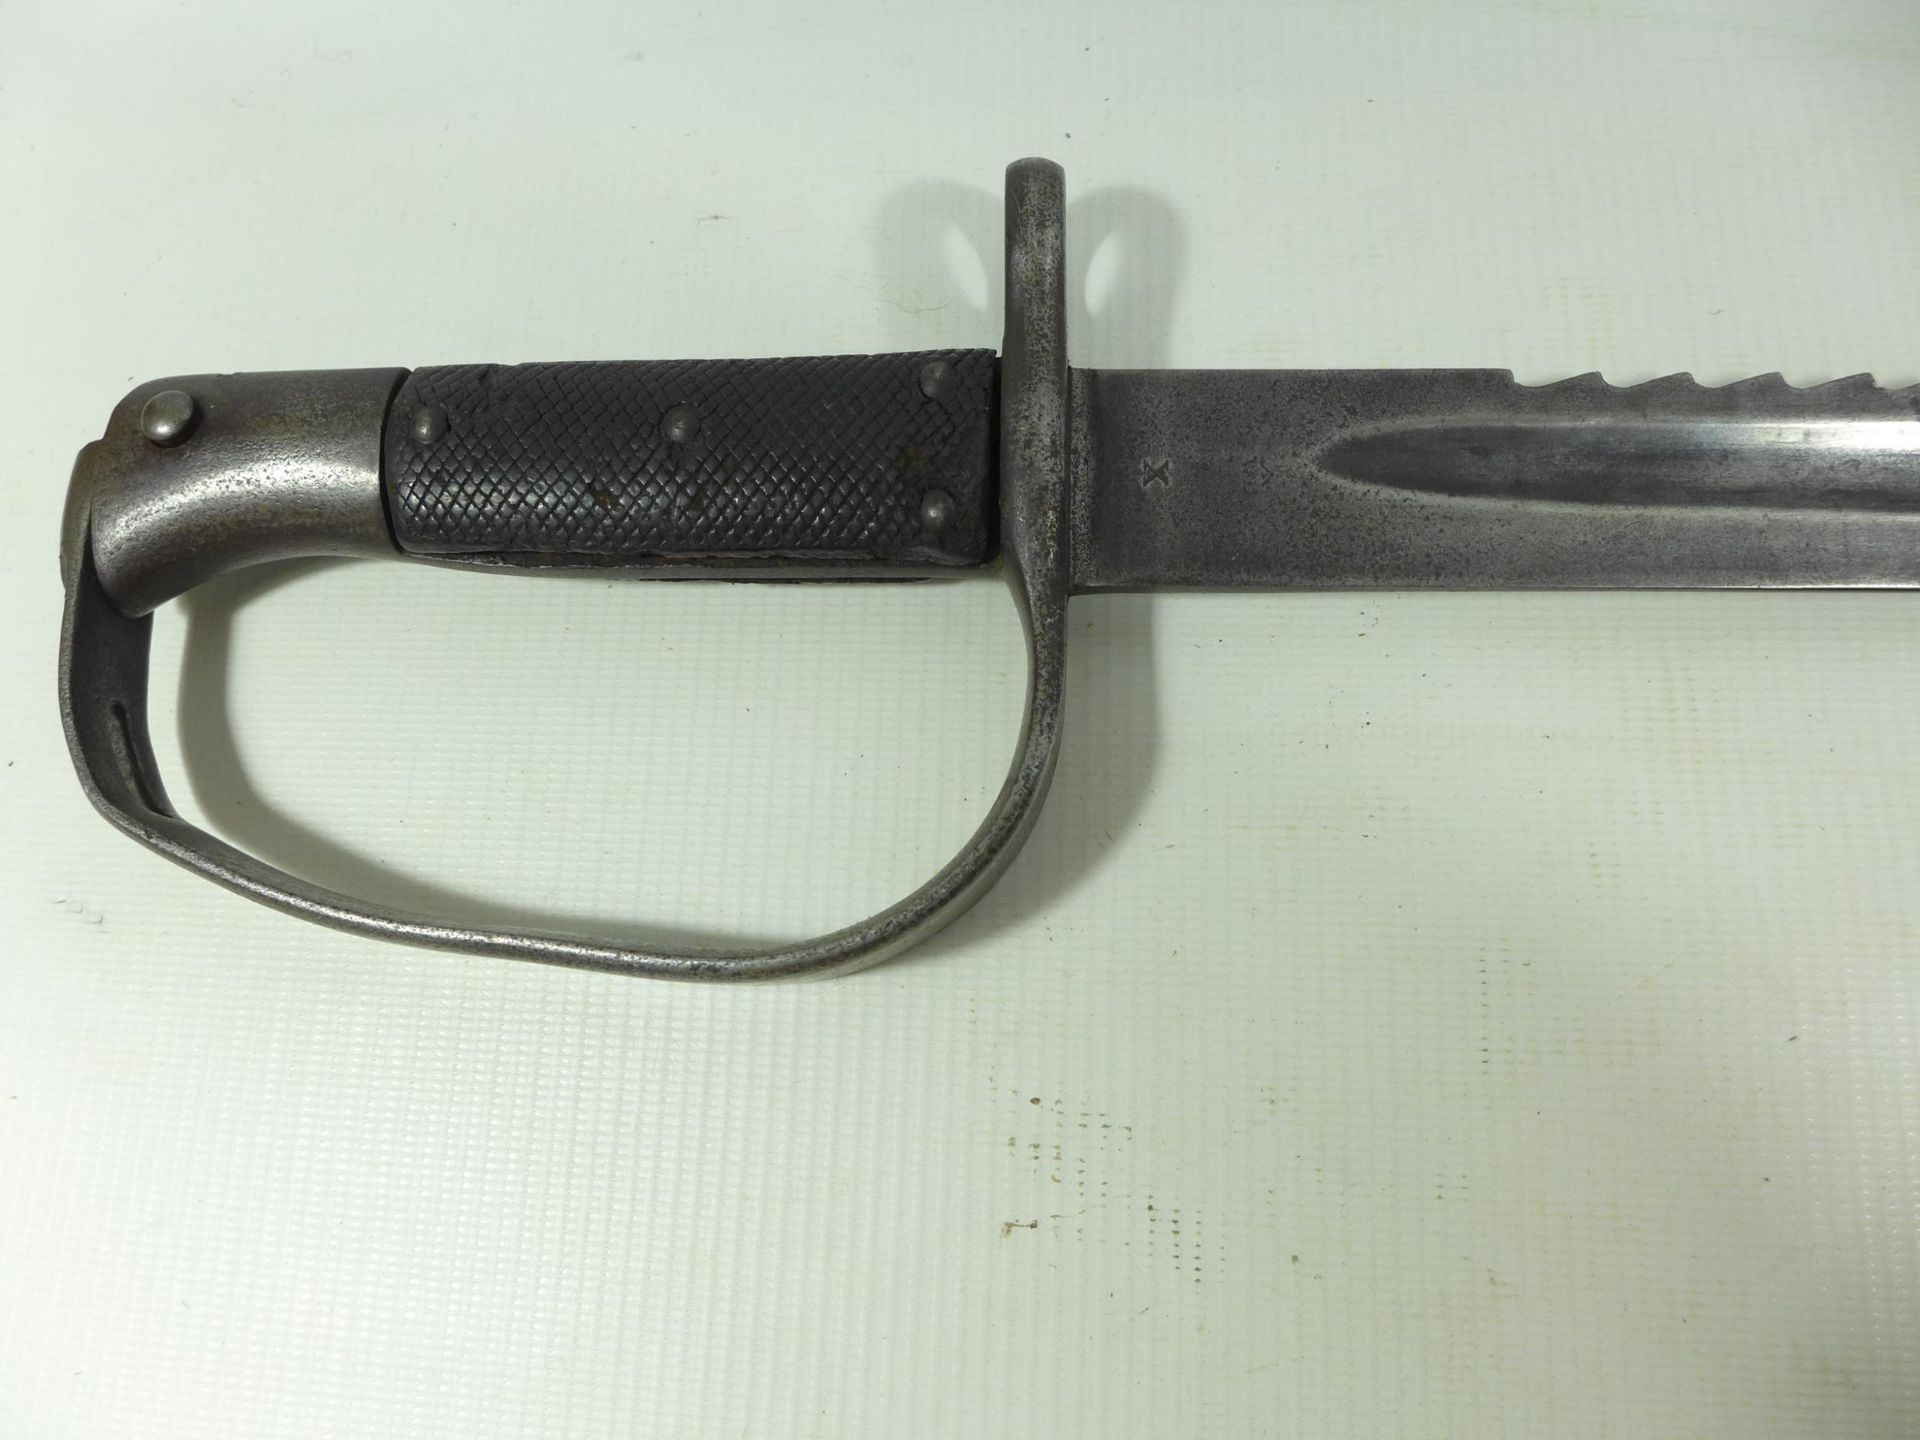 A LATE 19TH/EARLY 20TH CENTURY SAWBACK BAYONET FOR A MARTINI HENRY CARBINE, 65CM BLADE - Image 2 of 9